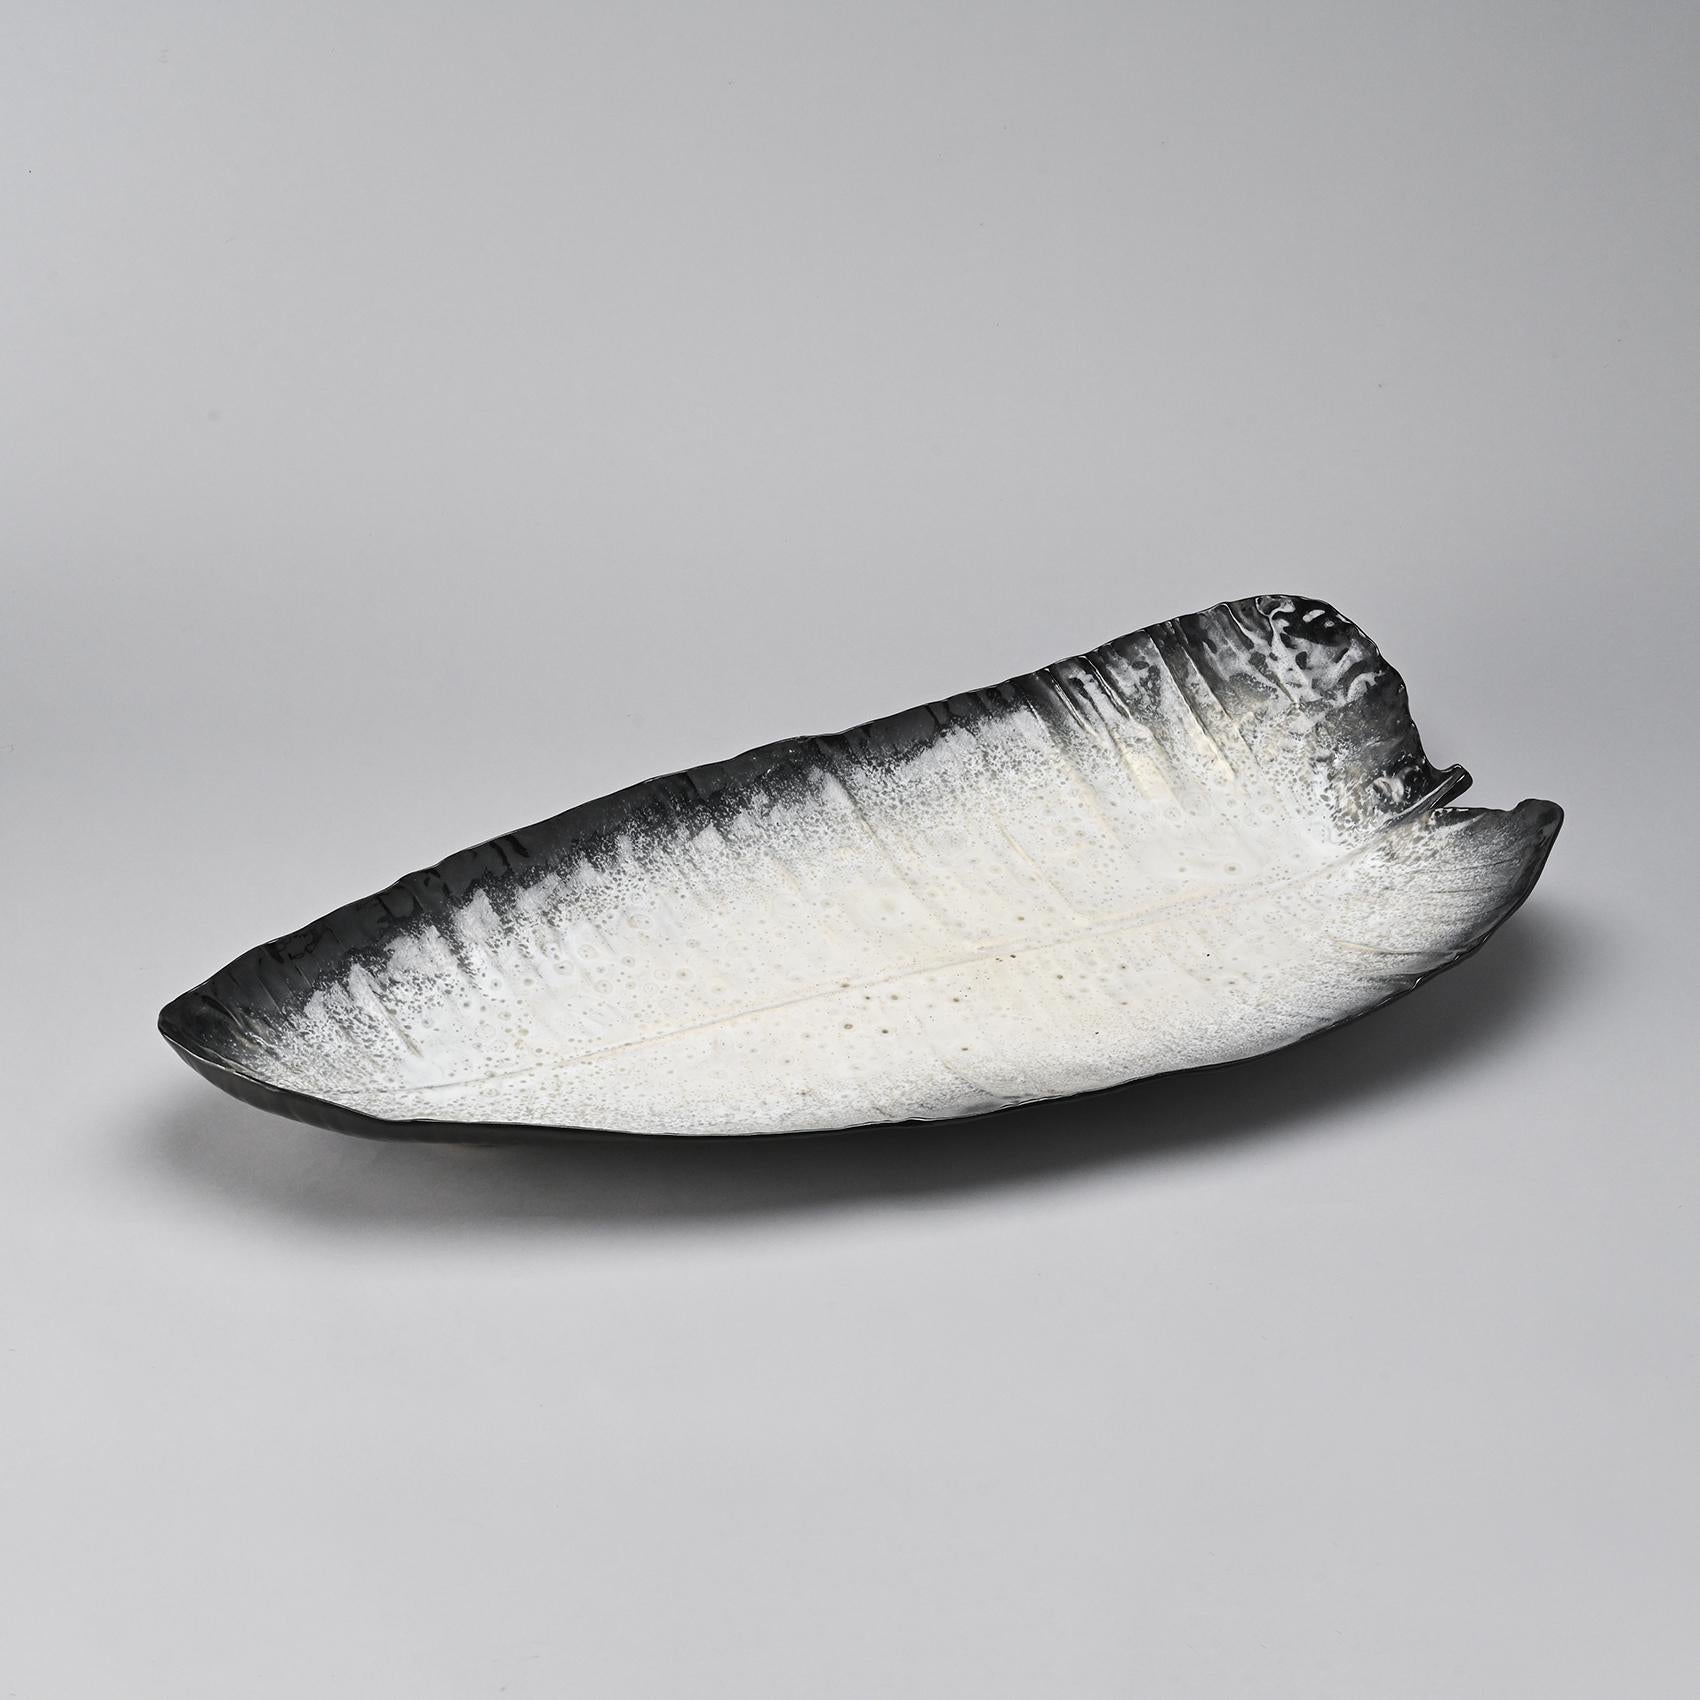 A very large dish by the French ceramist and sculptor Pol Chambost, one of the leading ceramic artists in 20th-century France, whose influence was significant in the 1950s and who subsequently trained numerous talents.

This wide leaf-shaped piece,